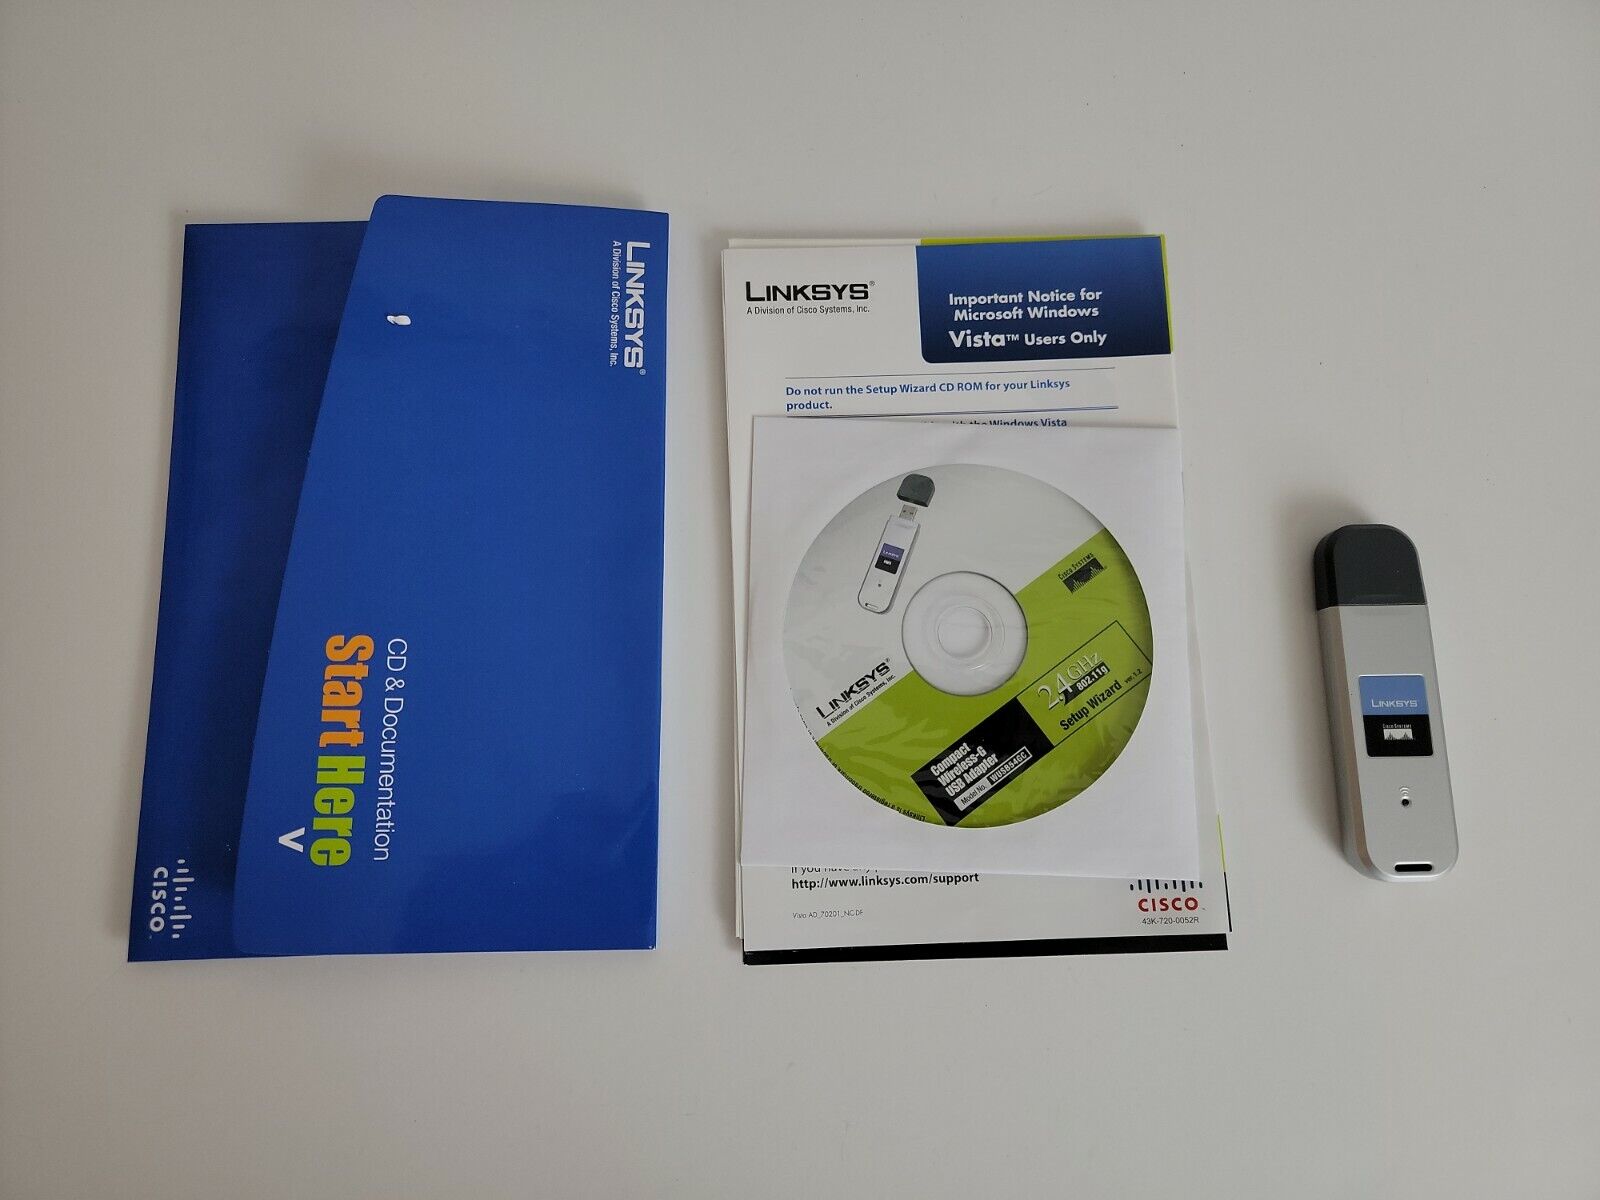 Linksys WUSB54GSC Compact Wireless-G USB Network Adapter with SpeedBooster